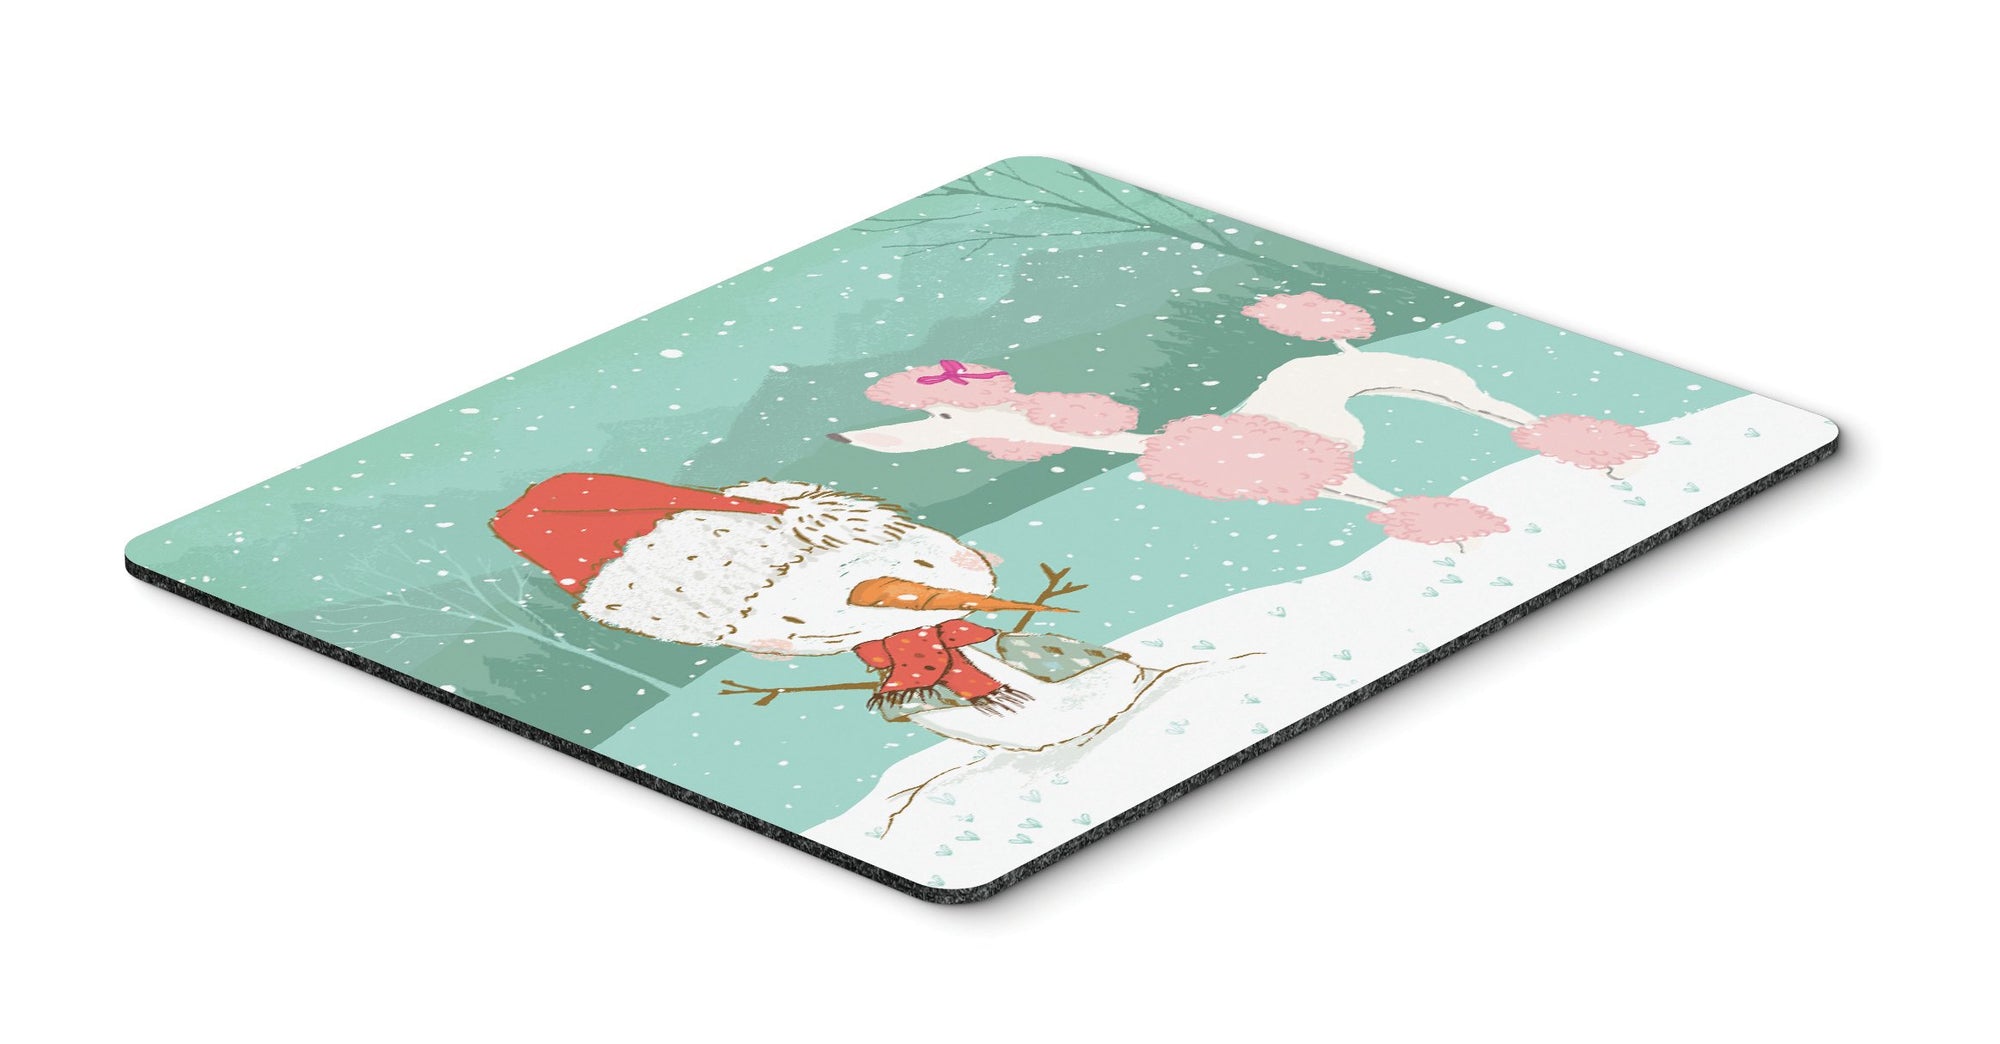 Pink Poodle Snowman Christmas Mouse Pad, Hot Pad or Trivet CK2066MP by Caroline's Treasures